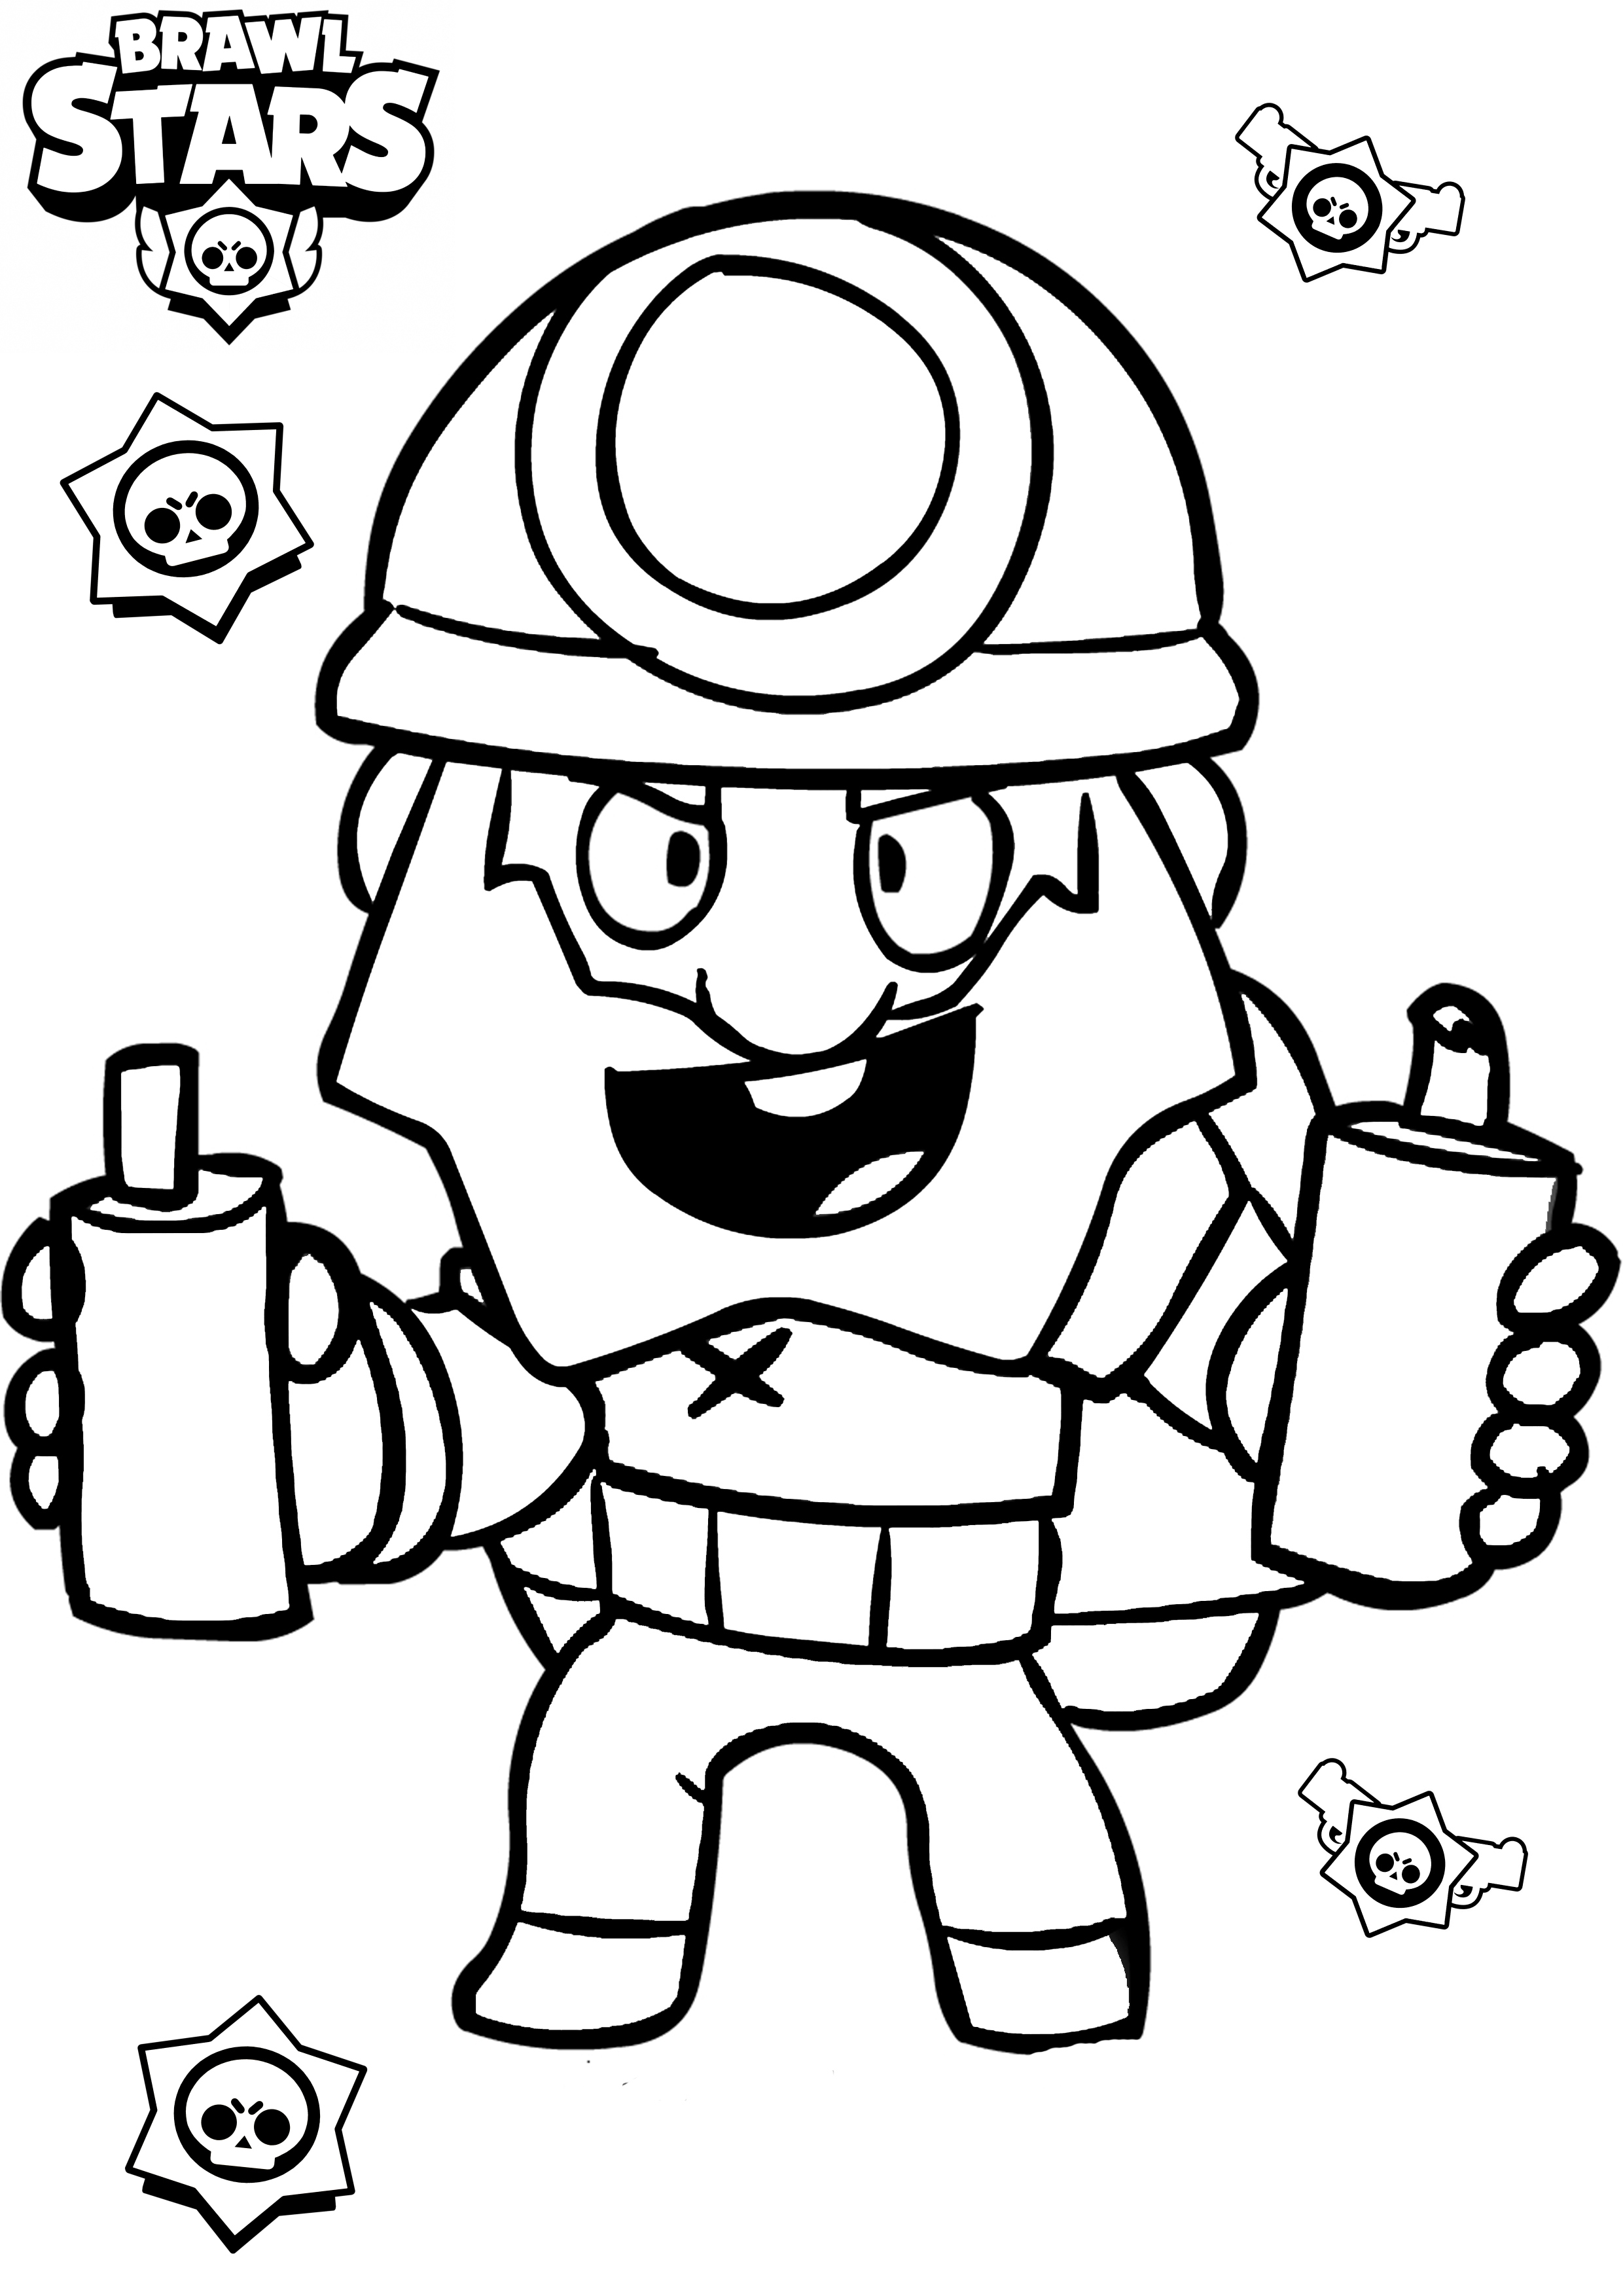 Coloring page Brawl Stars Dynamike fighter